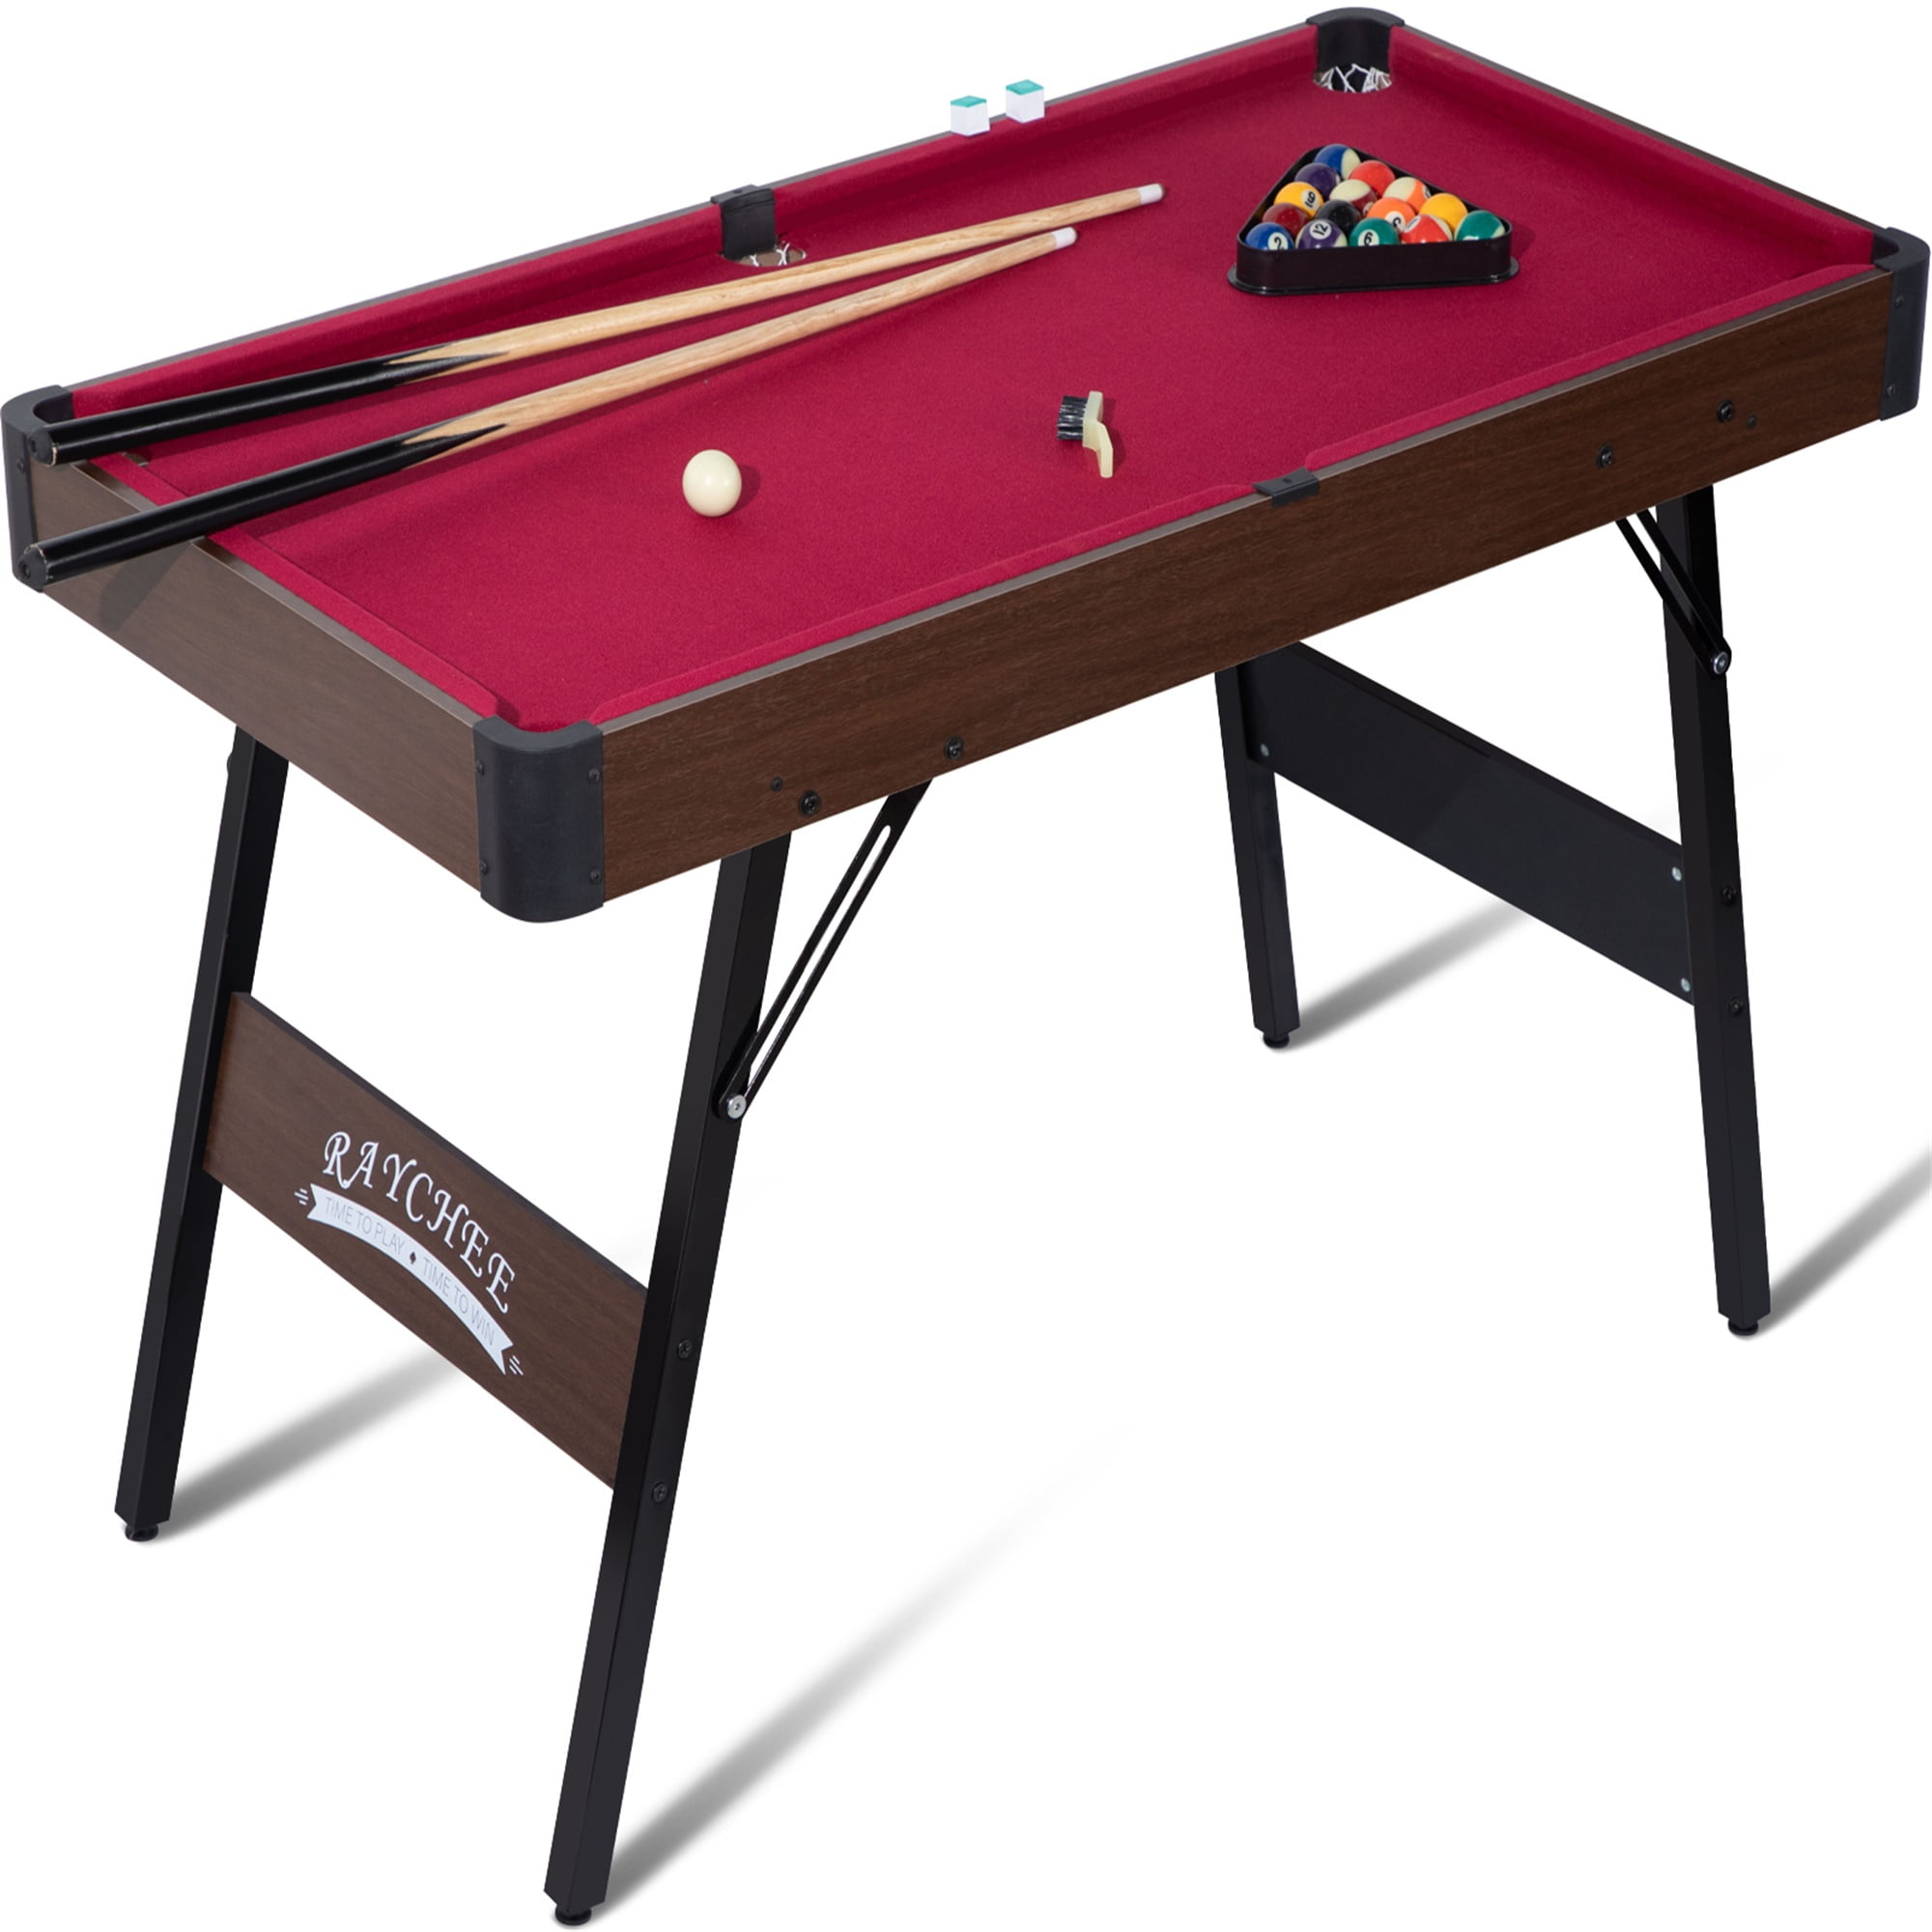 Home Leisure Direct - We've dropped the prices of our Joy Chinese 8-Ball  Pool Tables! What better time to check out this fantastic spin on pool from  China!